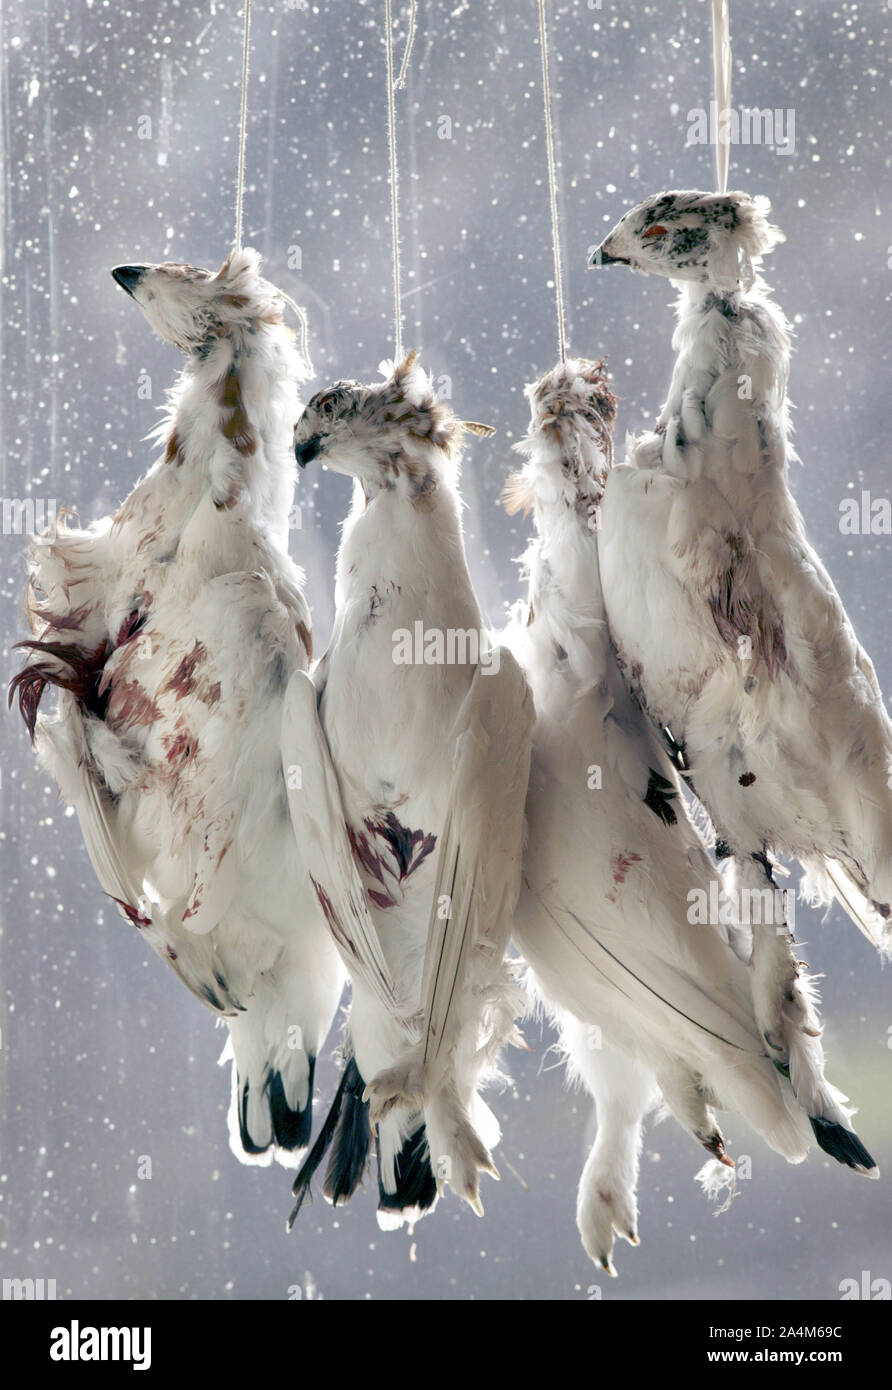 Dead grouses hanging in ropes - catch of the day Stock Photo